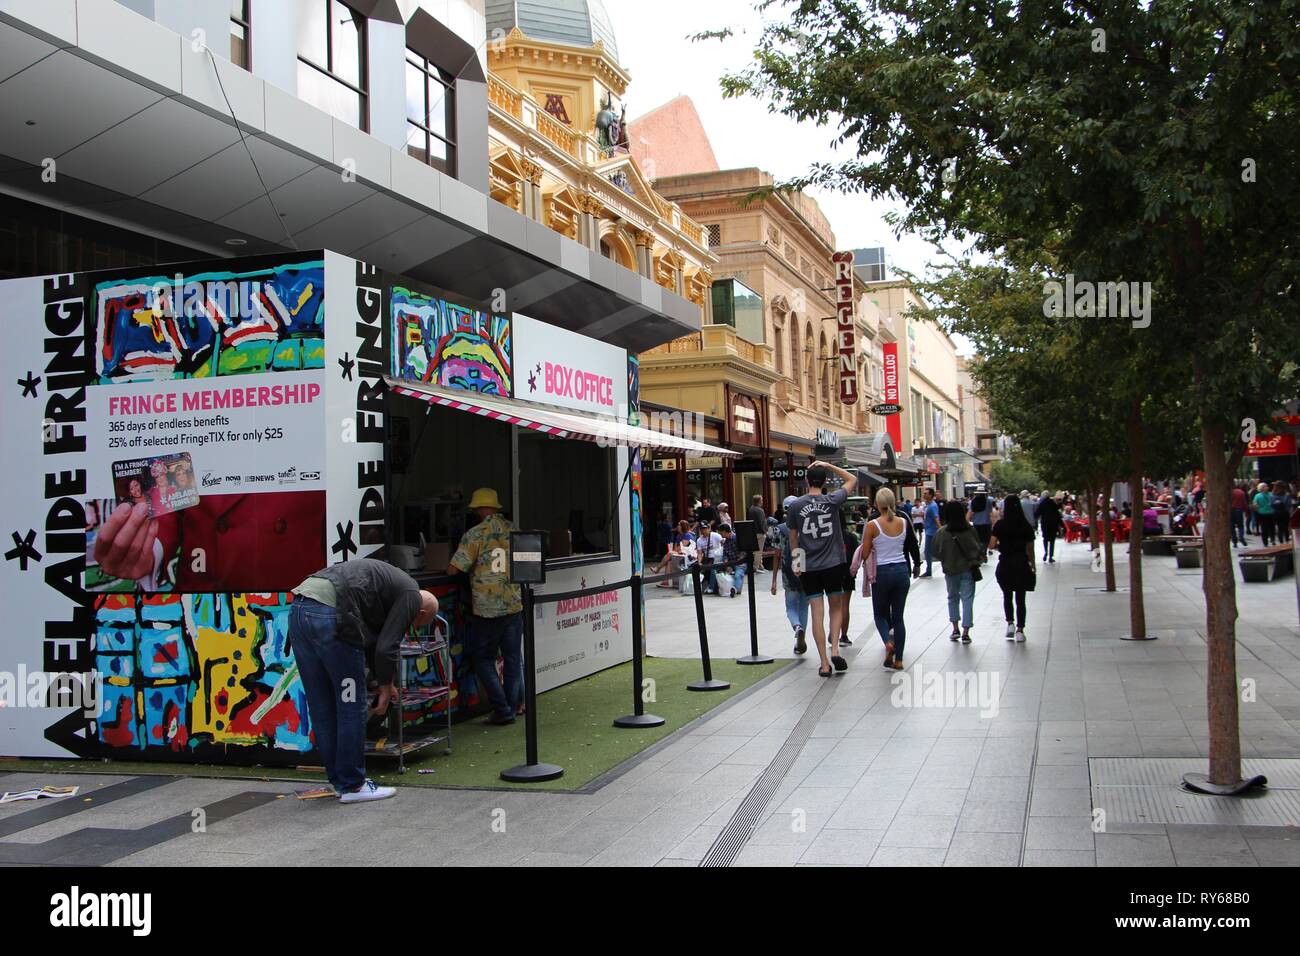 (190312) -- ADELAIDE, March 12, 2019 (Xinhua) -- Visitors buy tickets from a street booth for performances at the Adelaide Fringe Festival in Adelaide, Australia, March 11, 2019. The Adelaide Fringe, an annual arts festival founded nearly 70 years ago, lasts from Feb. 15 to March 17 this year. (Xinhua/Lyu Wei) Stock Photo